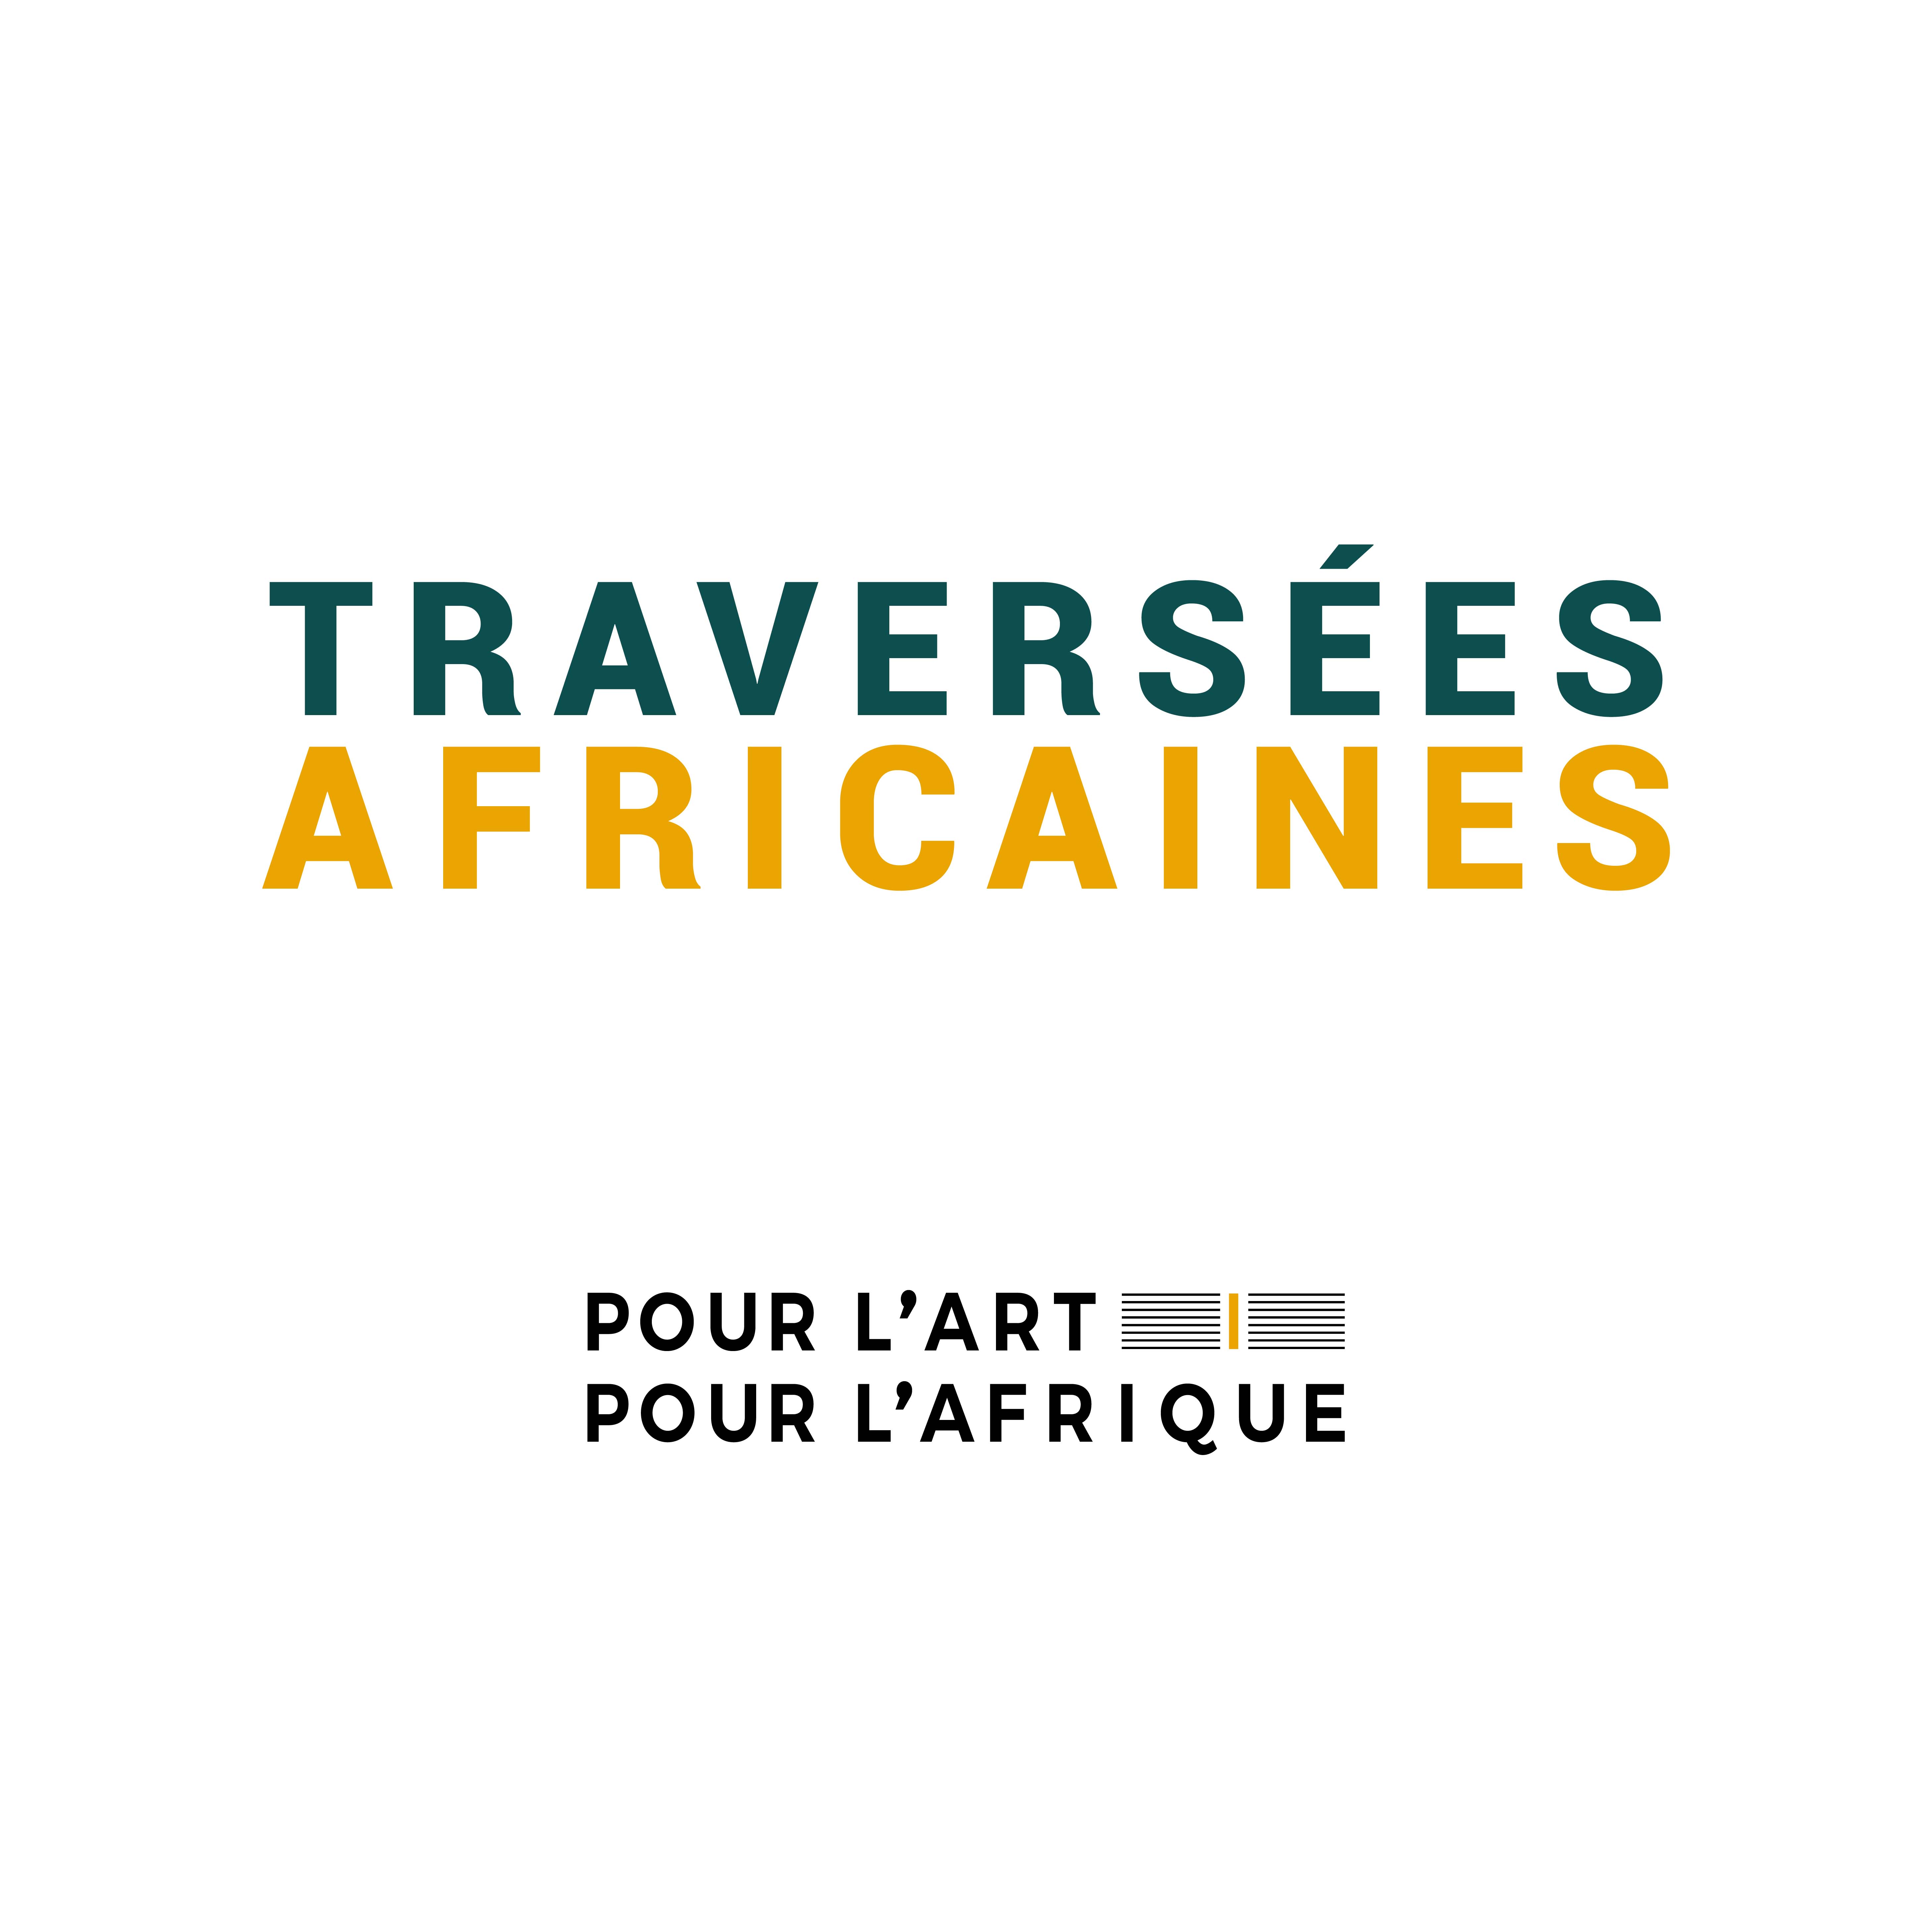 Traverses Africaines